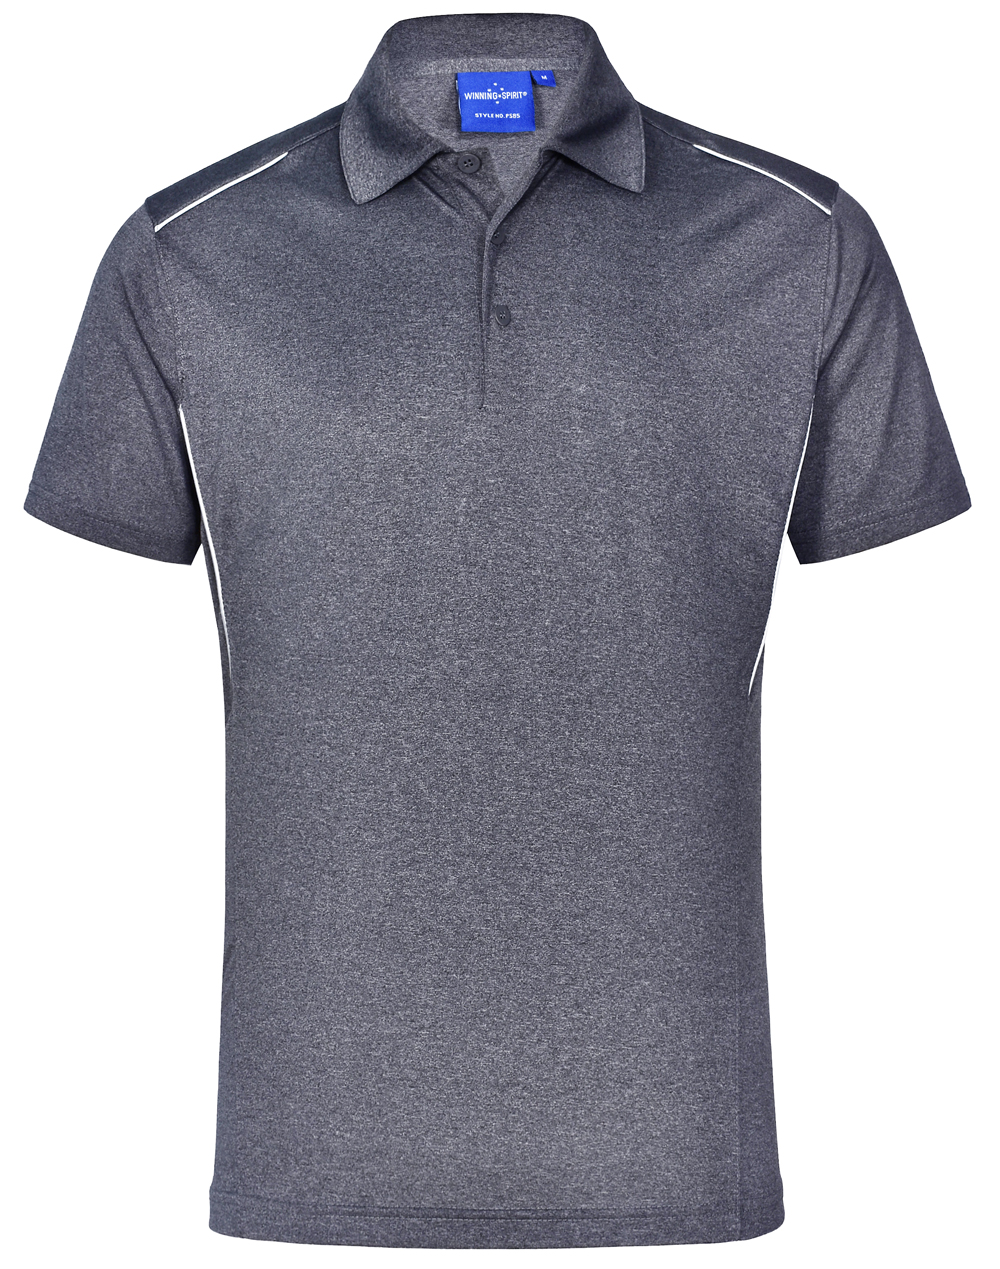 PS85/PS86 HARLAND POLO Men’s&Ladies’